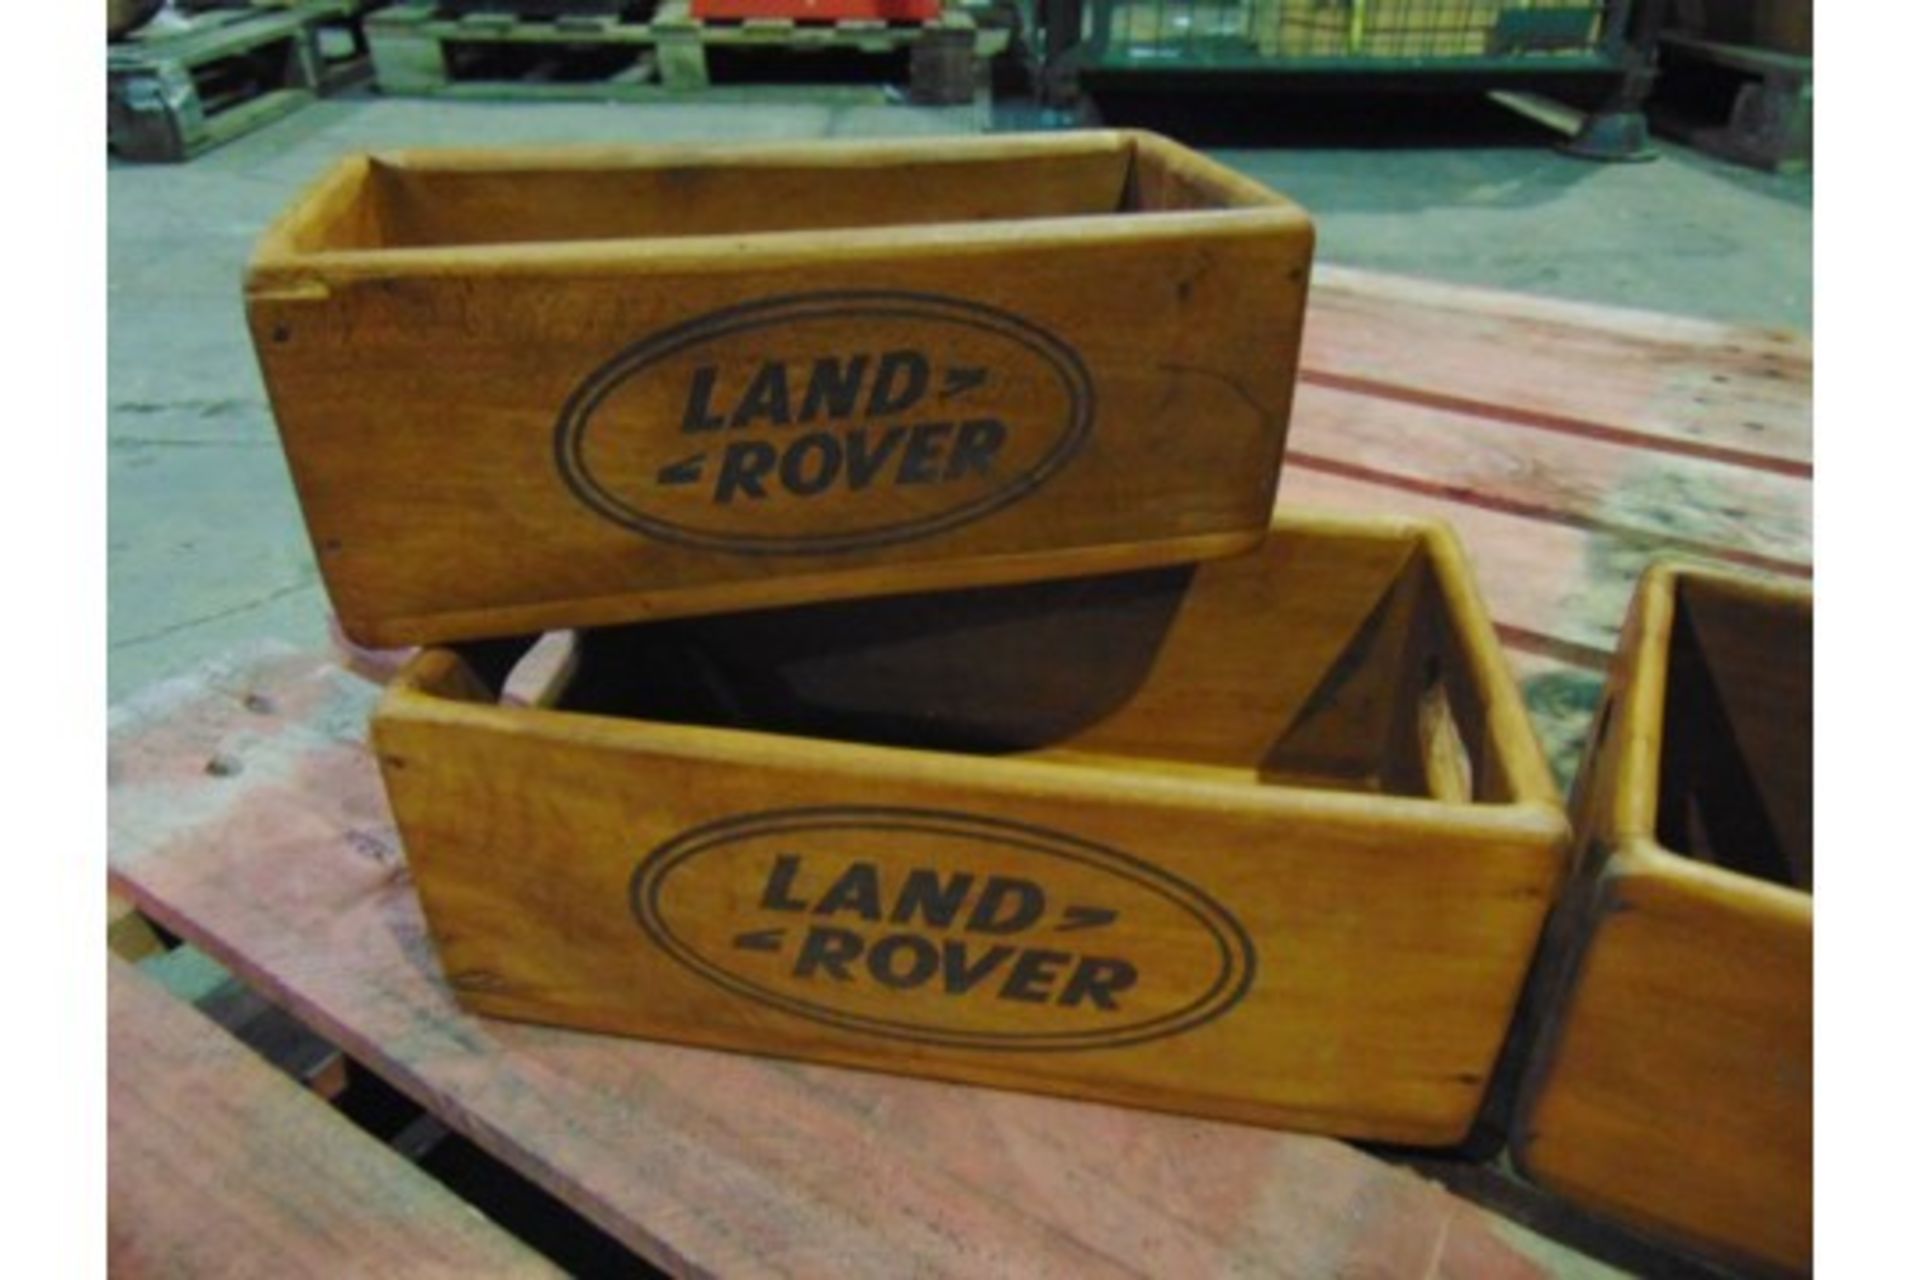 4 x Land Rover Wooden Display / Storage Boxes - Image 2 of 5